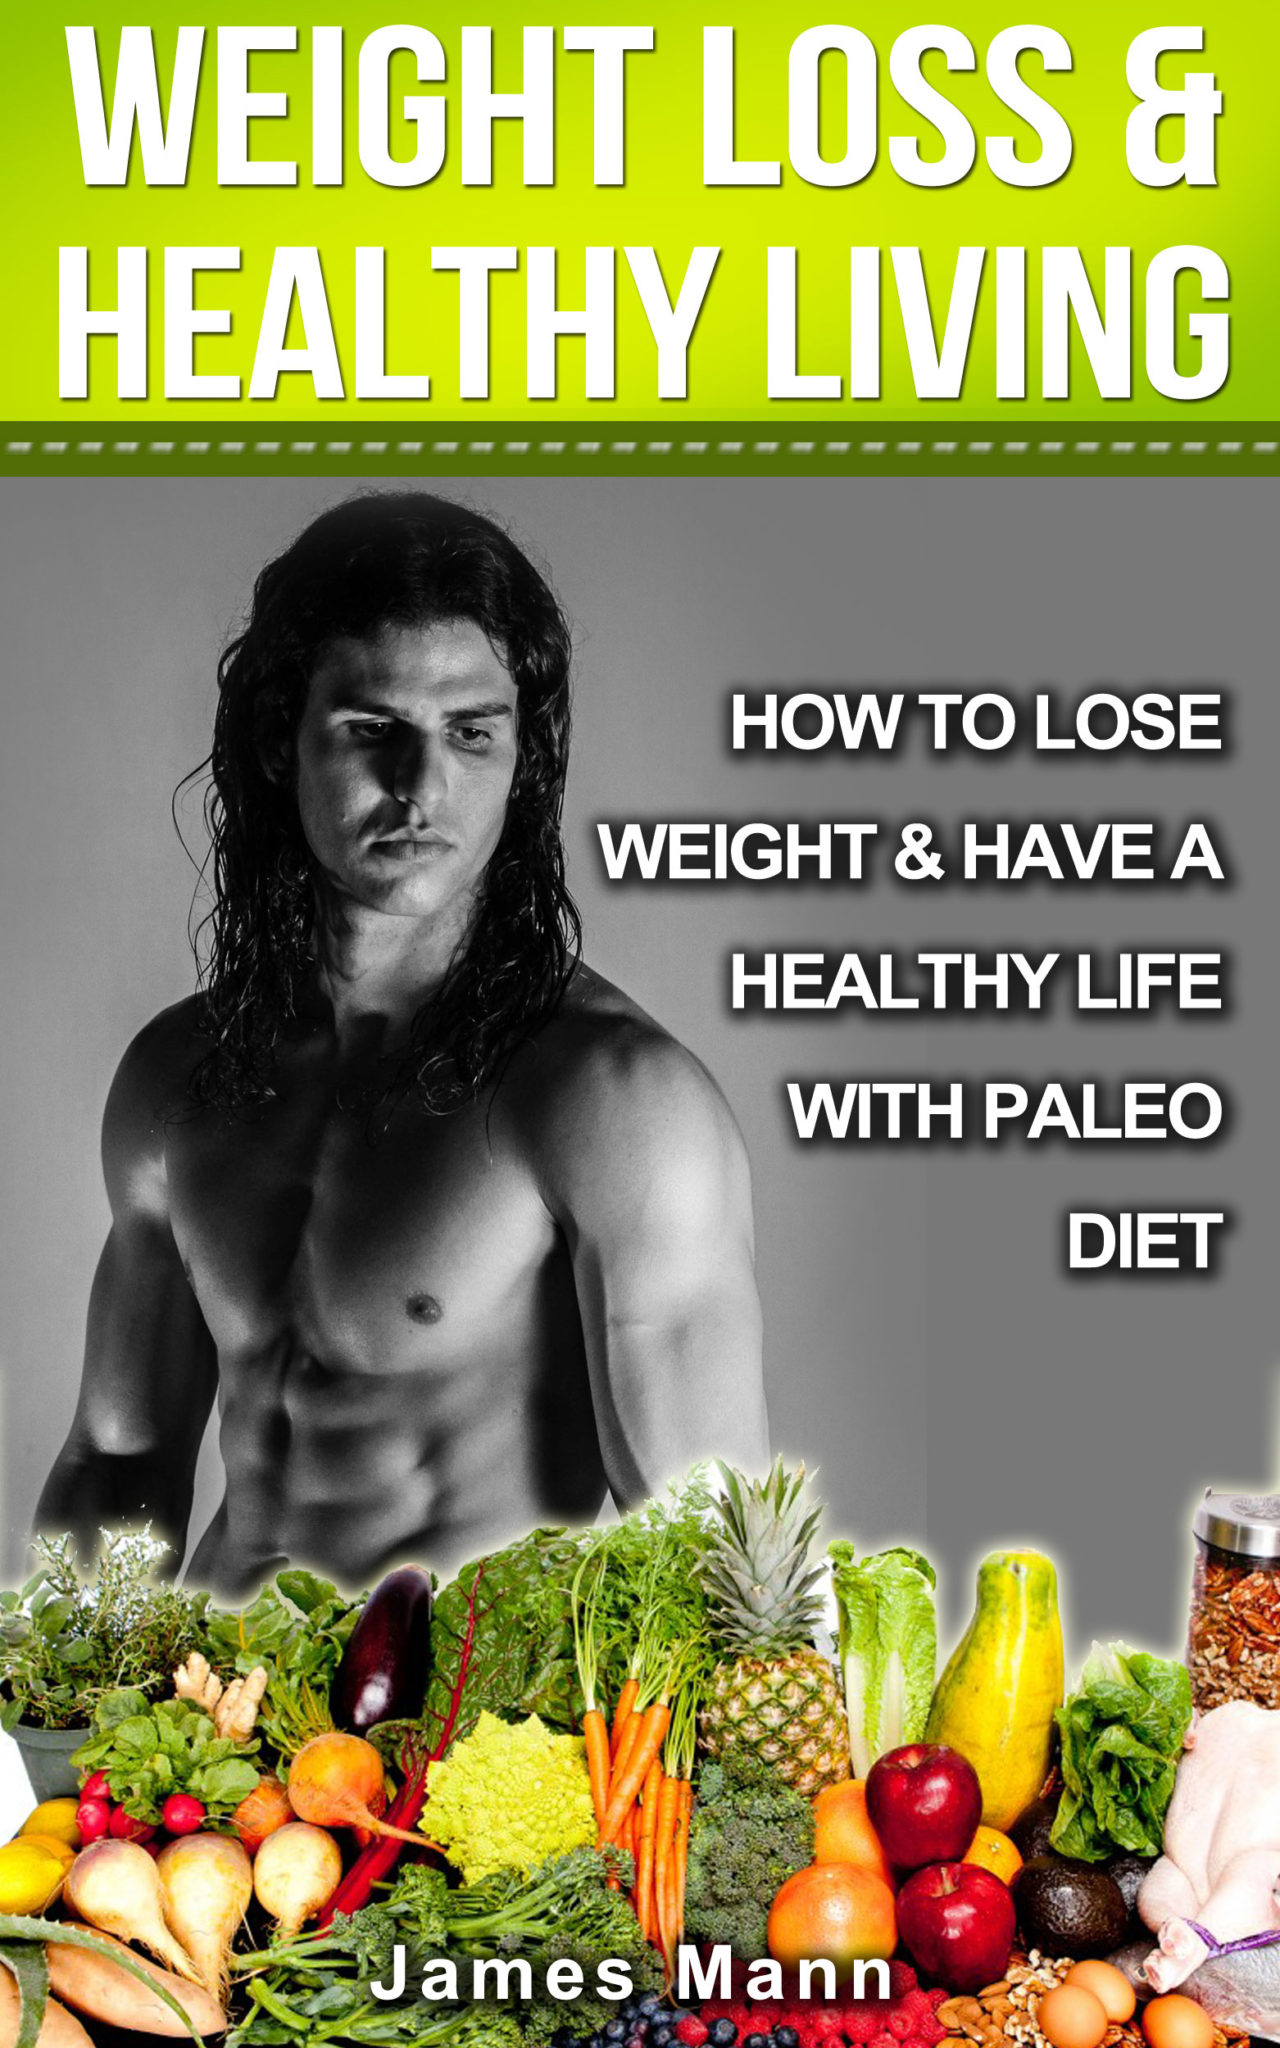 Weight Loss And Healthy Living: How To Lose Weight And Have A Healthy Life With Paleo Diet by James Mann